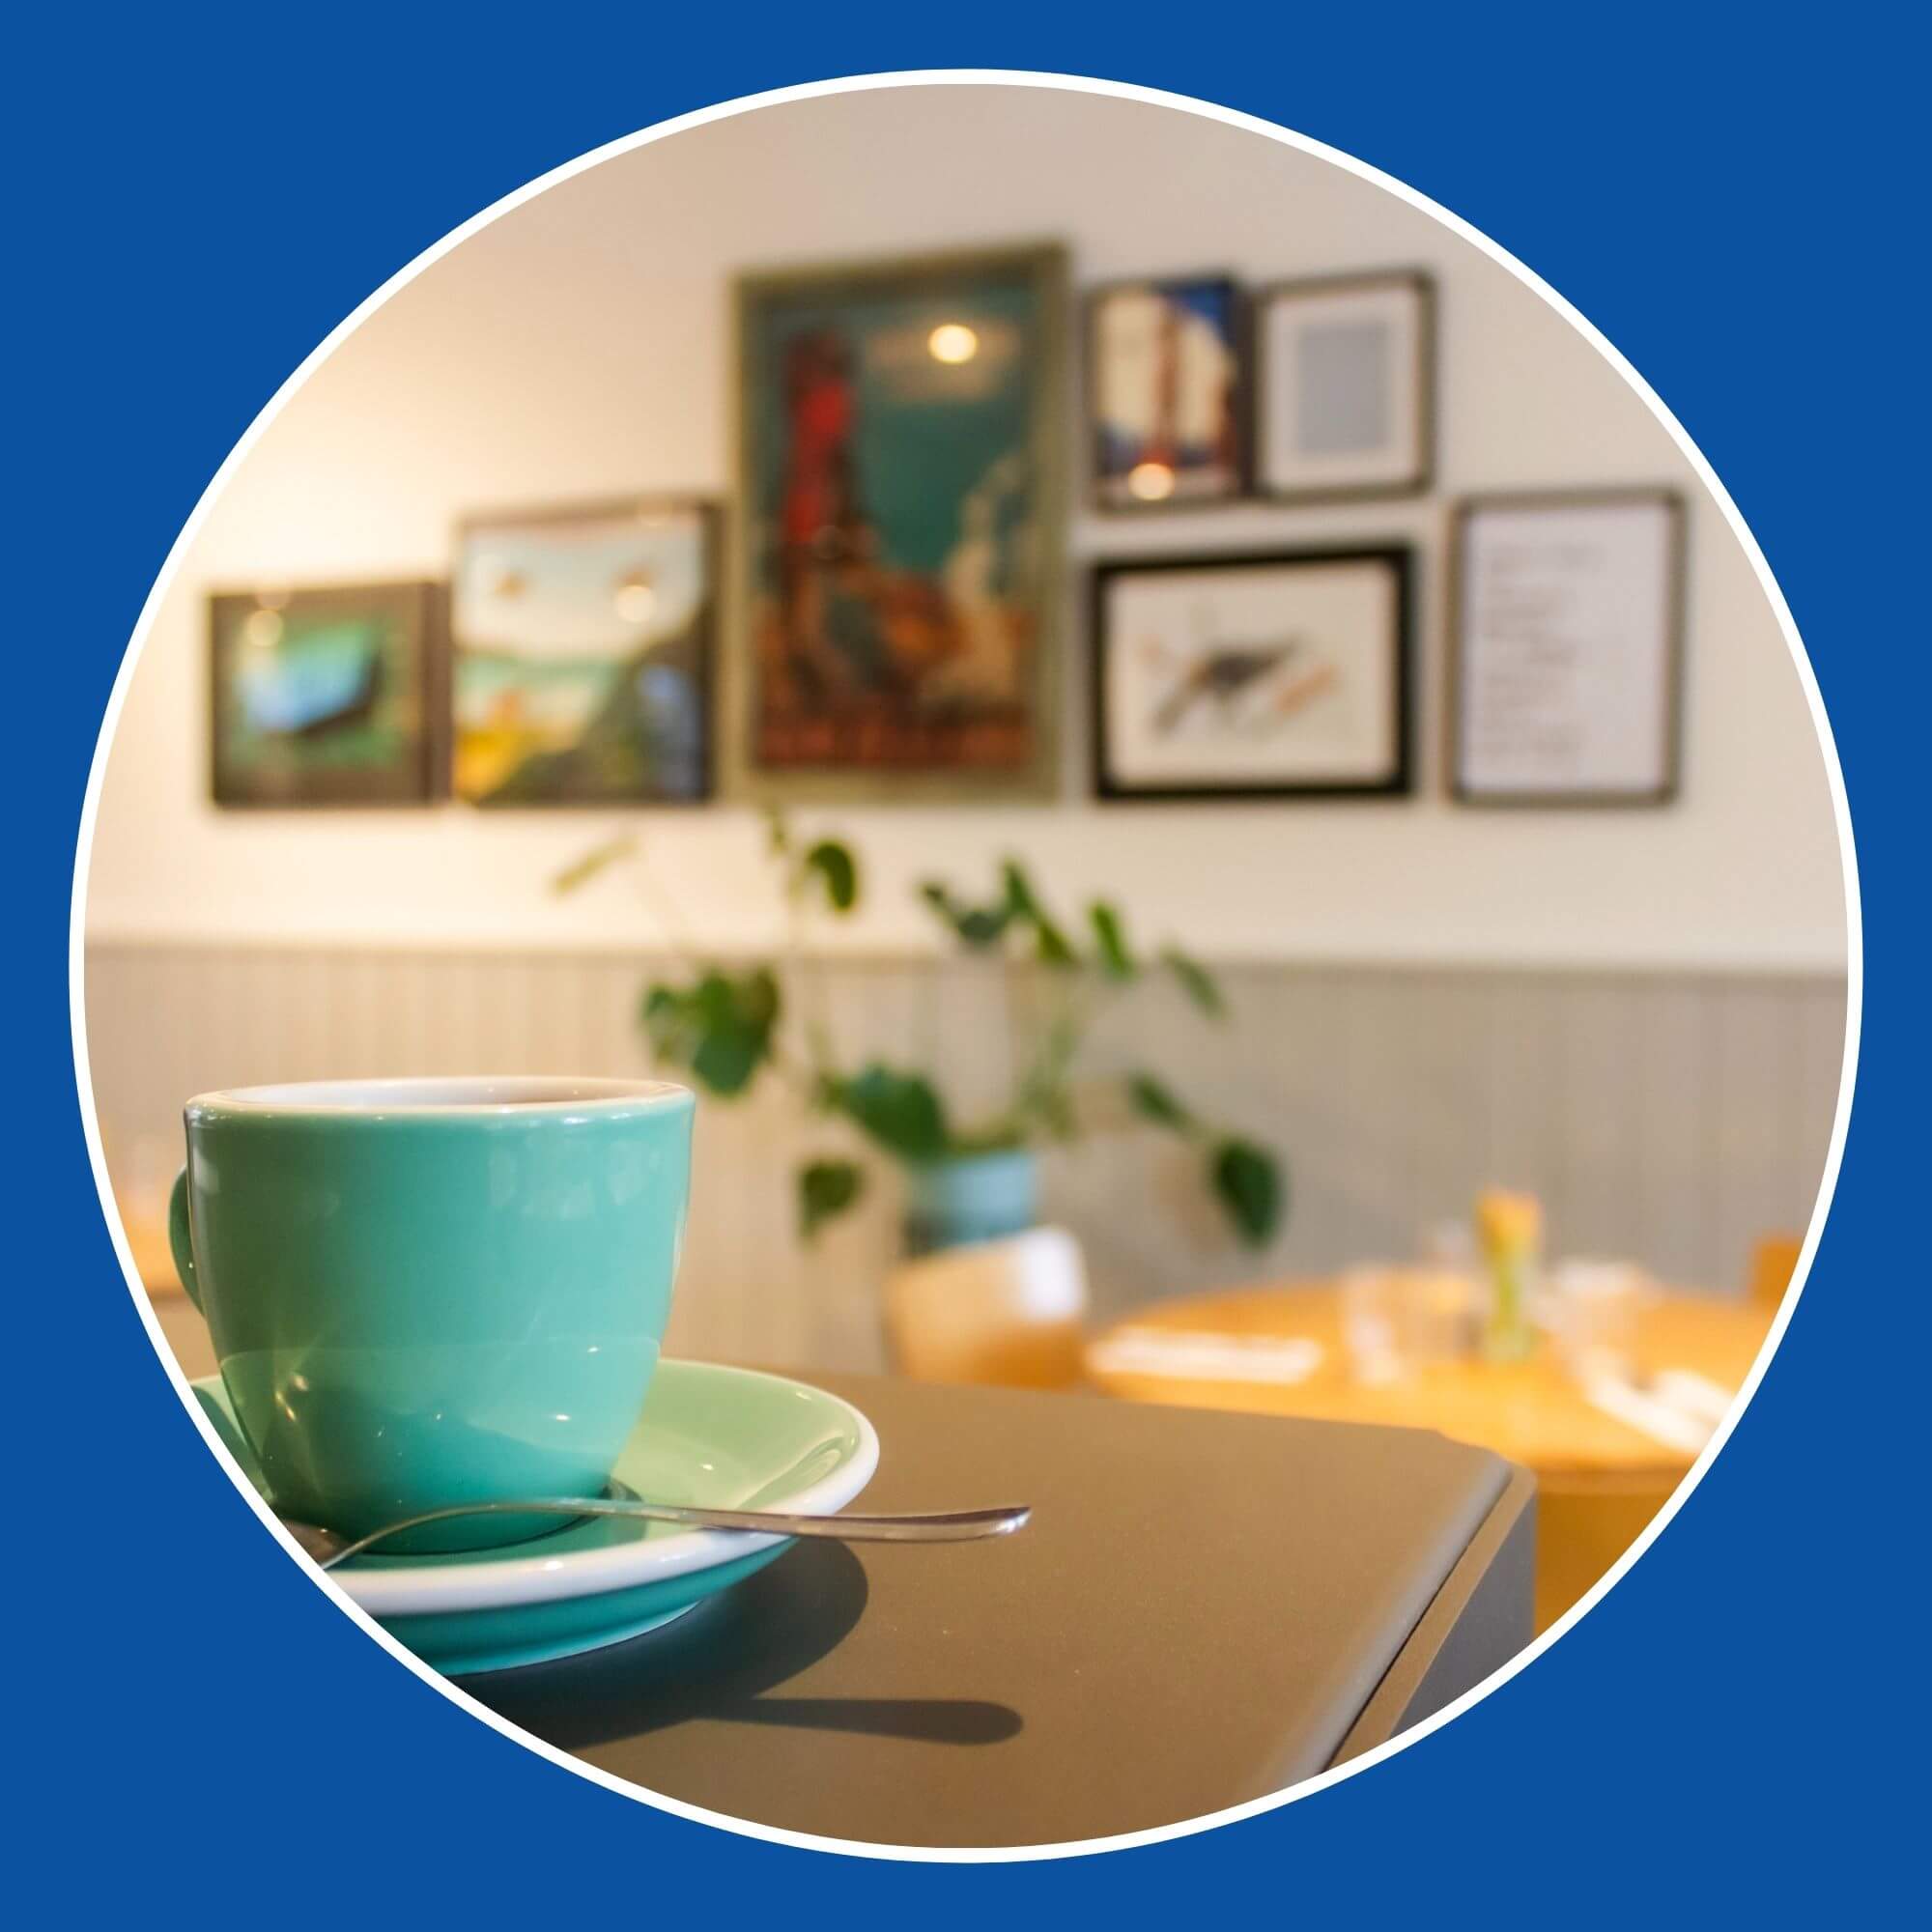 Photo showing a cup and saucer on a table in a cafe. Image from Unsplash (Photographer - Louis Hansel)